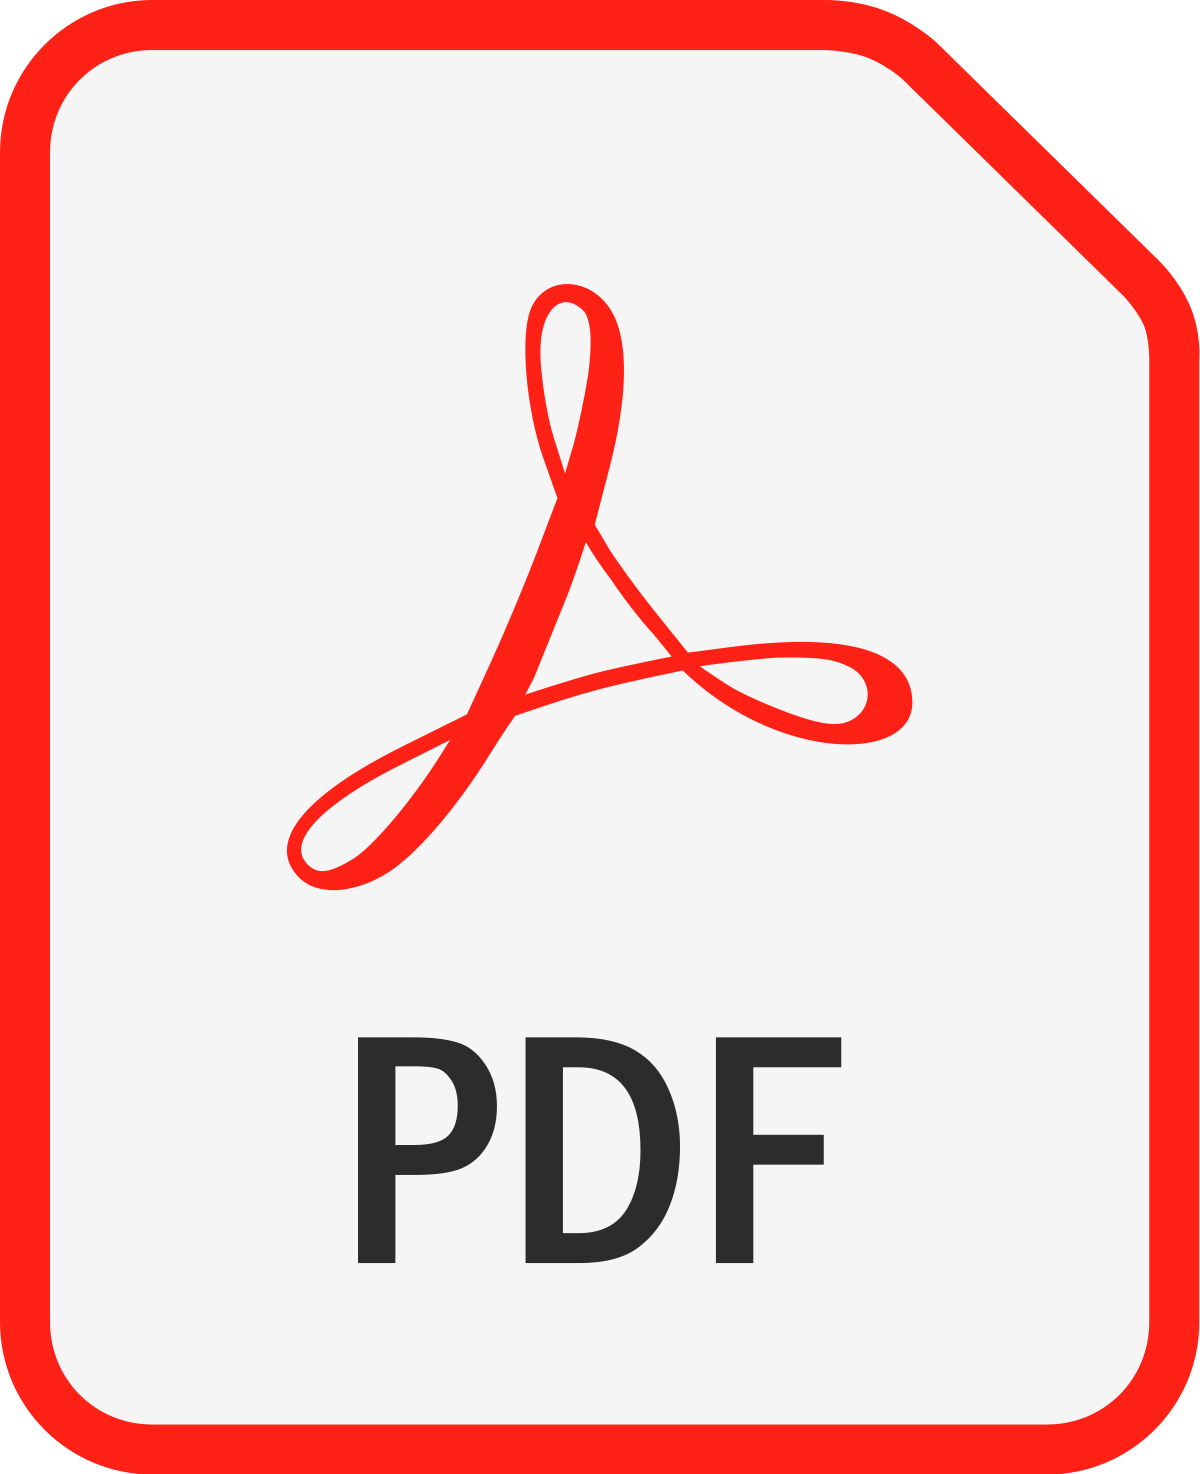 PDF file icon with a red X